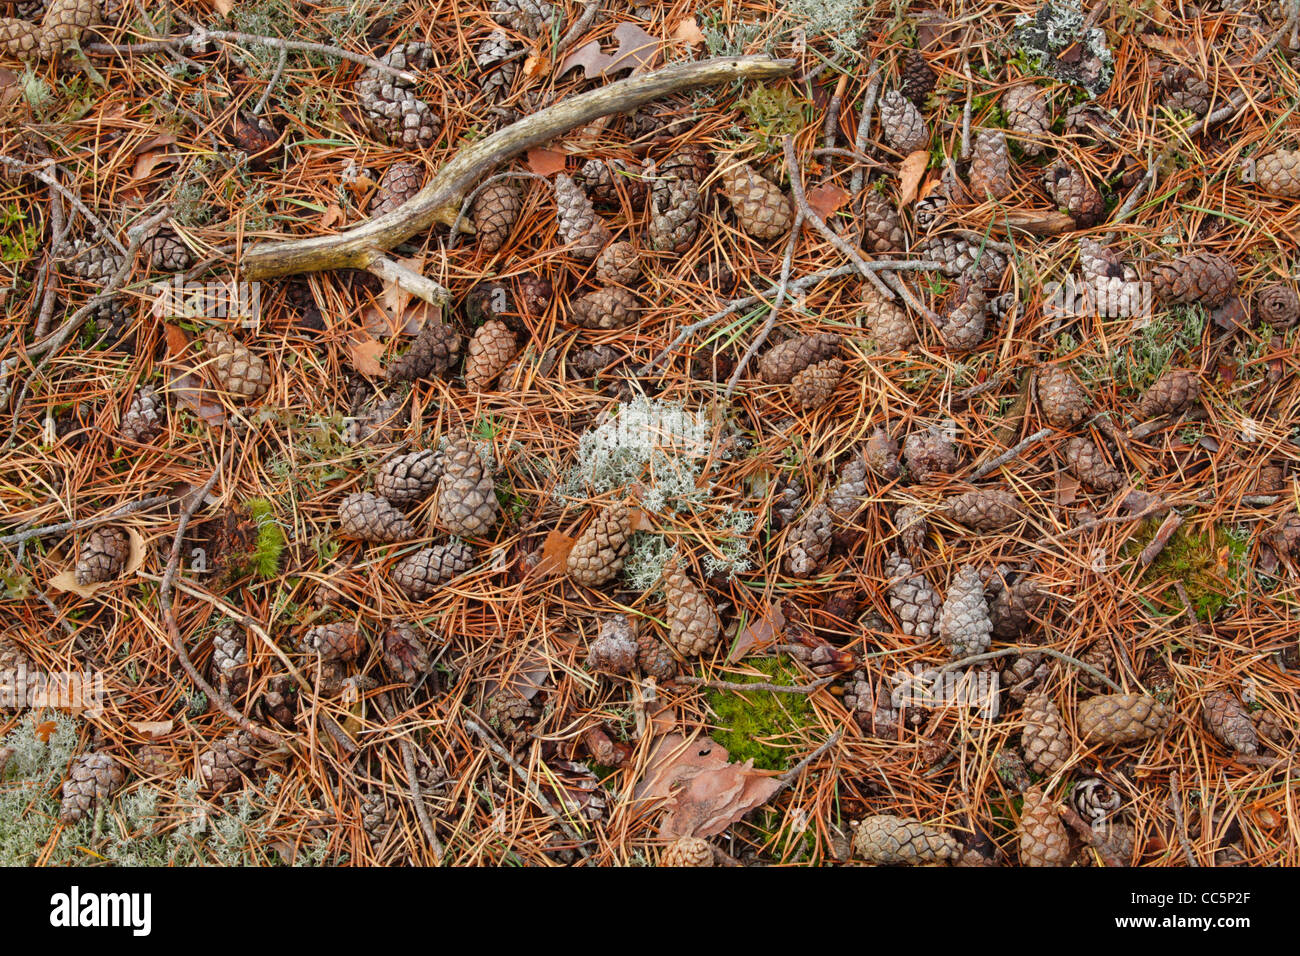 Fallen pine cones and needles under Scots Pine (Pinus sylvestris) trees. Muir of Dinnet National Nature Reserve, Scotland. Stock Photo